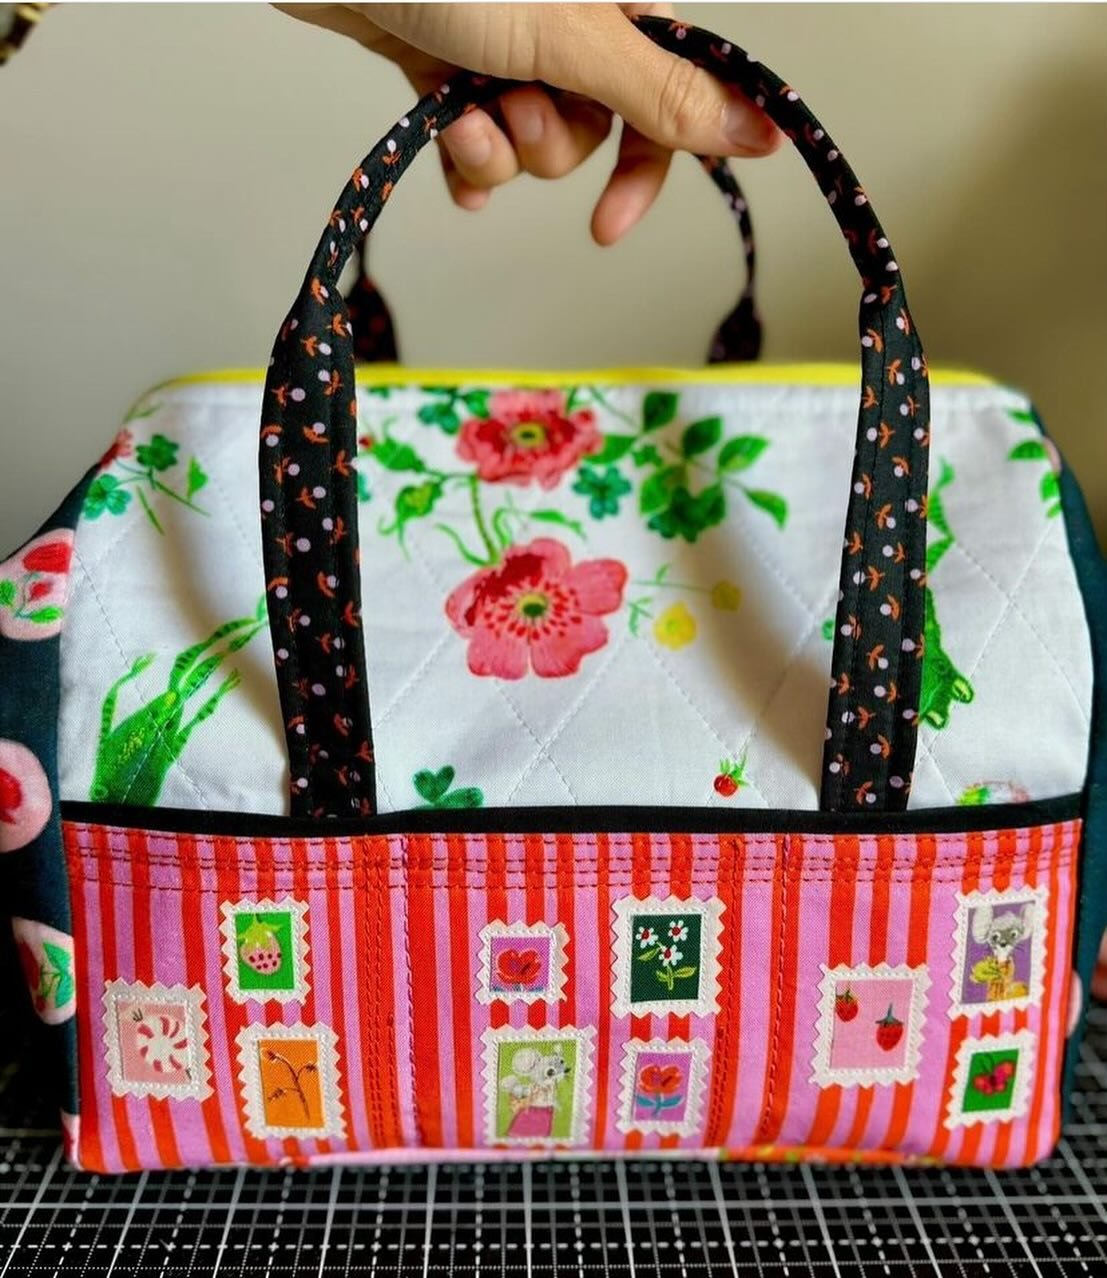 Love love love this #stylishsewingtote from @honeybee.homemaker using these stunning @heatherrossinsta and @littlepincushionstudio fabrics from @windhamfabrics 😍😍😍
Those tiny stamps make this bag so precious and unique and we love what she did wit